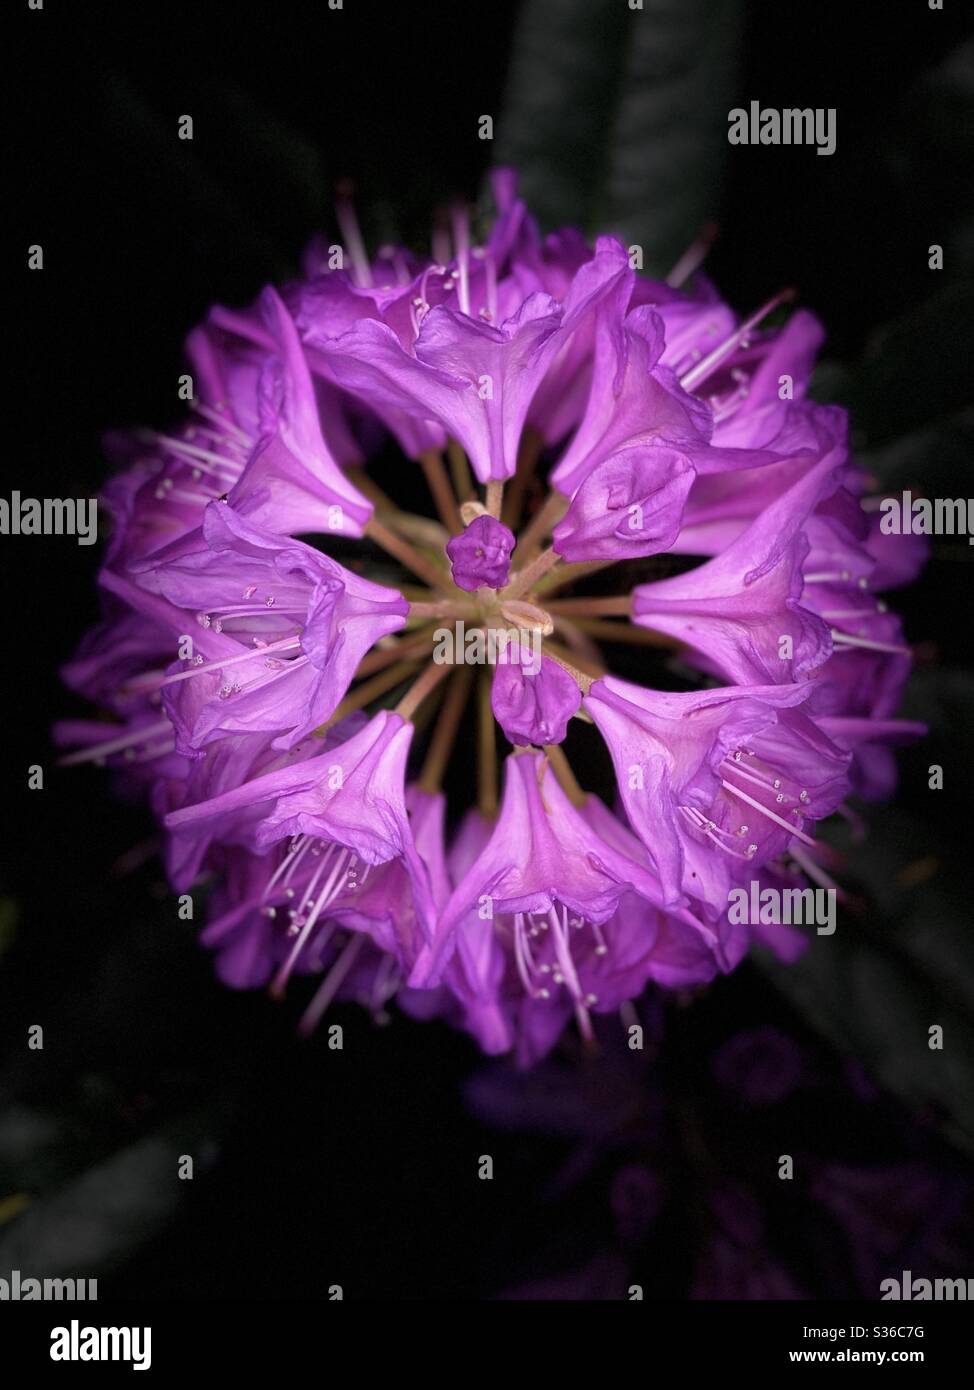 Rhododendron. Purple on Black. Close-up Stock Photo